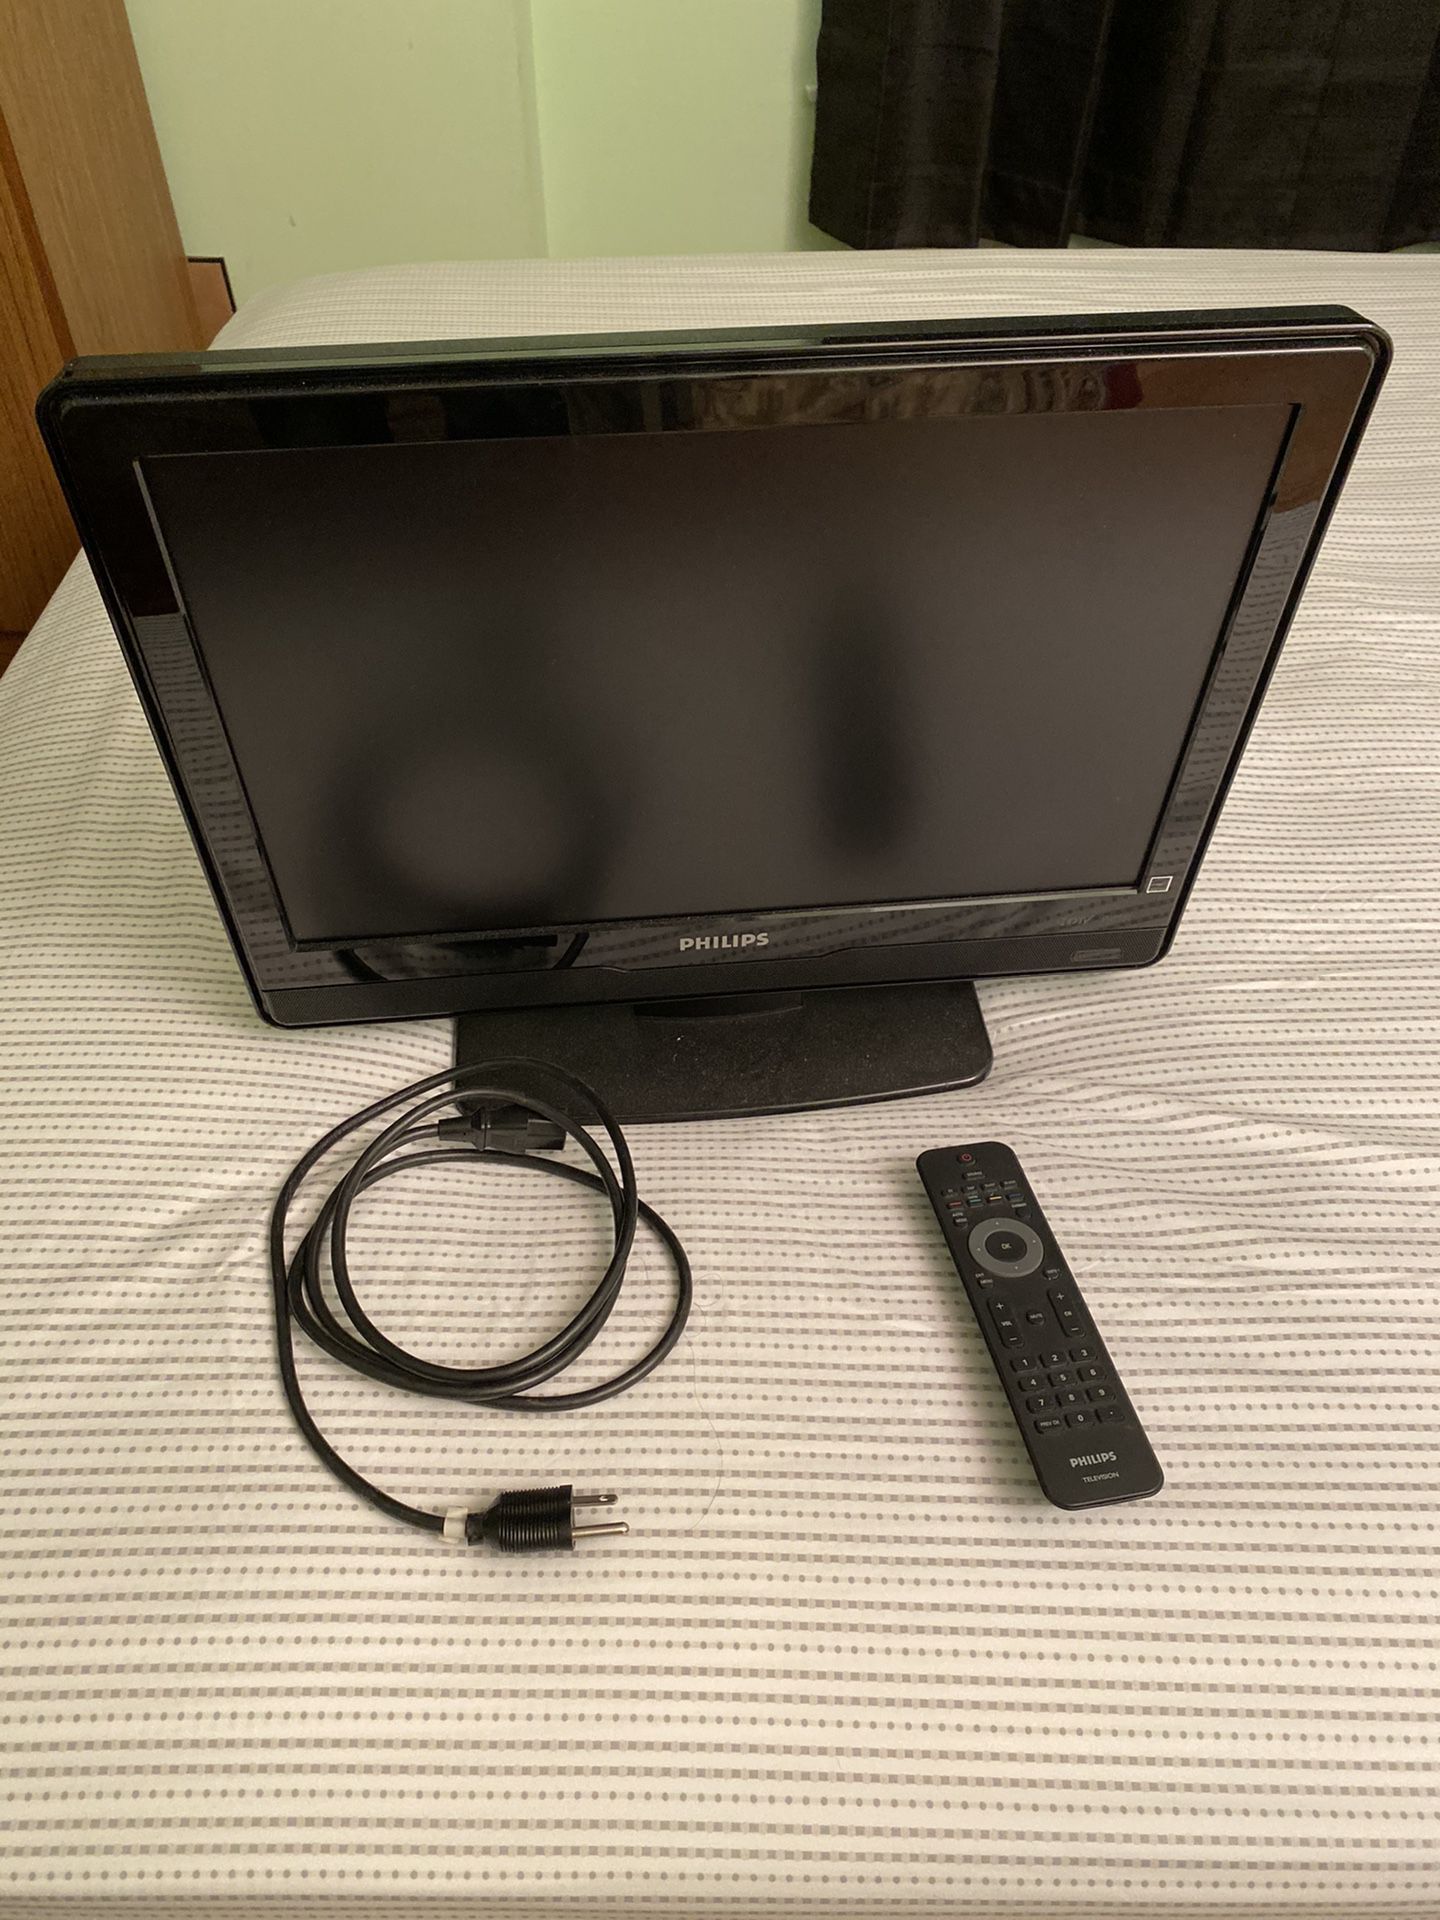 Philips HD TV and monitor